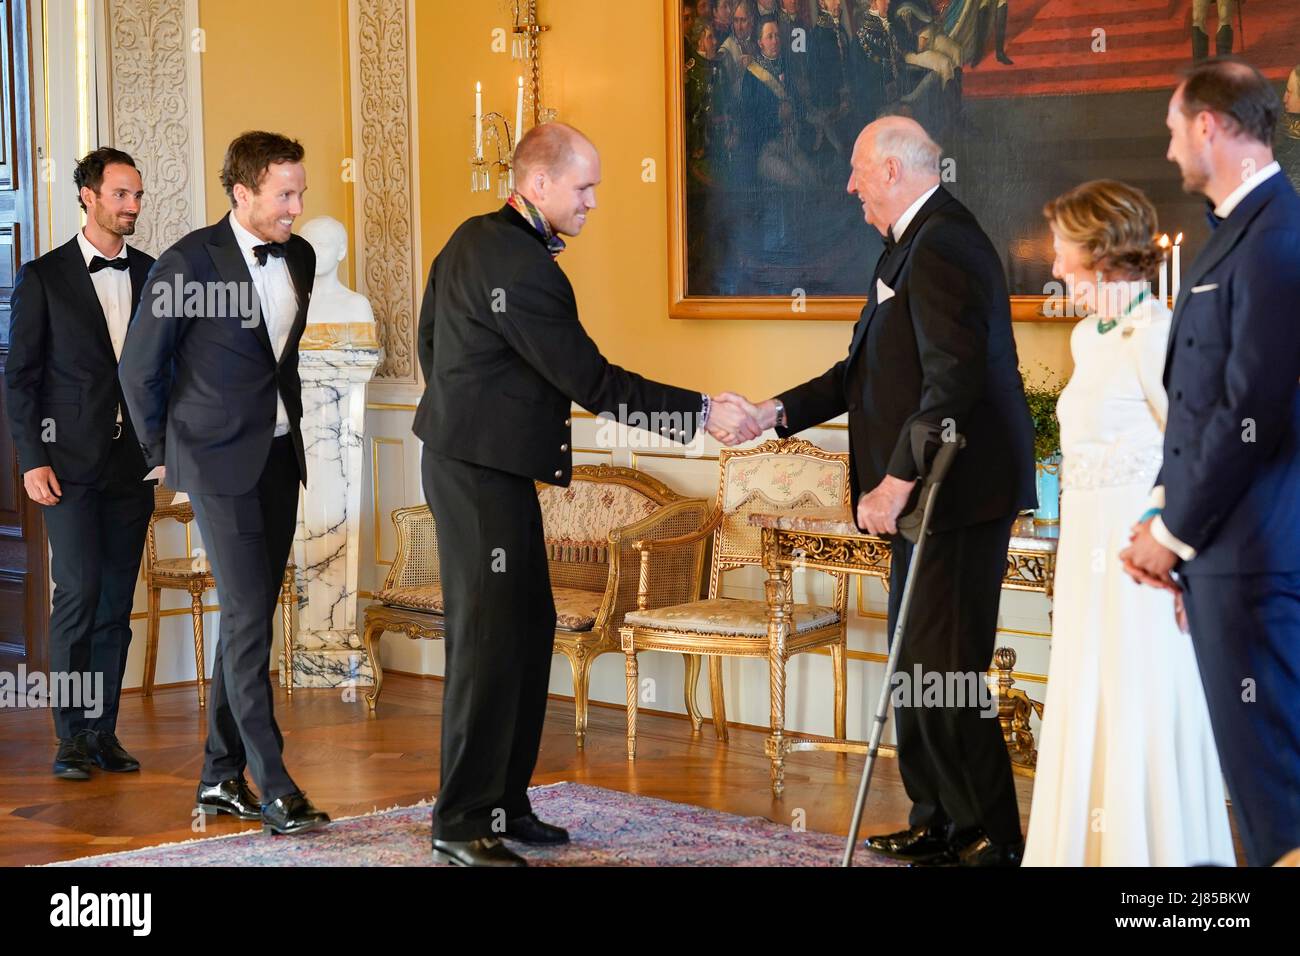 Oslo 20220512.King Harald greets Paal Golberg before the dinner the royal couple holds for the athletes from the Olympics and Paralympics in Beijing at the Palace. Behind follow Emil Iversen and Hans Christer Holund. Photo: Terje Bendiksby / NTB Stock Photo